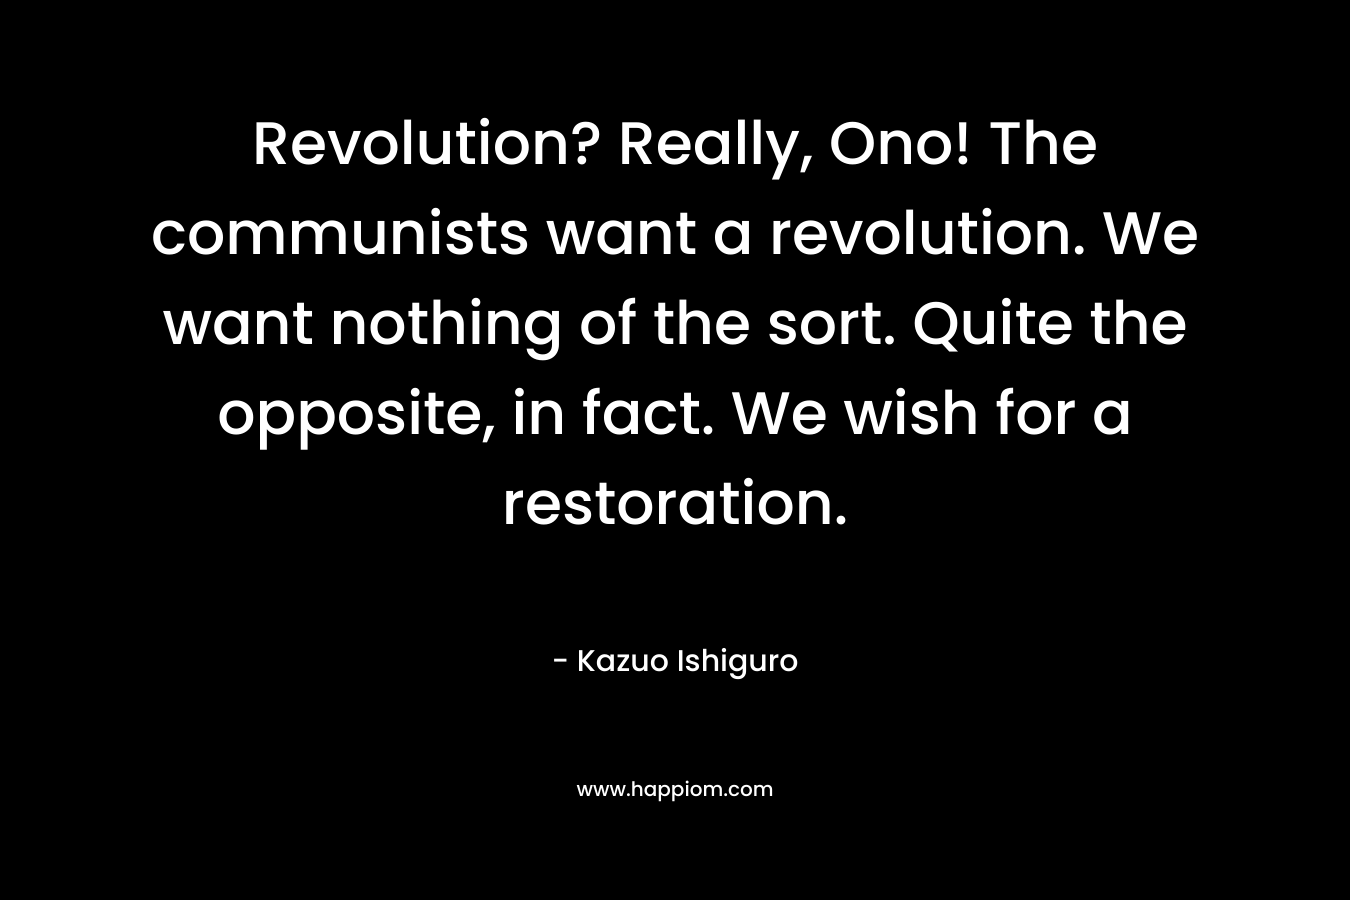 Revolution? Really, Ono! The communists want a revolution. We want nothing of the sort. Quite the opposite, in fact. We wish for a restoration.